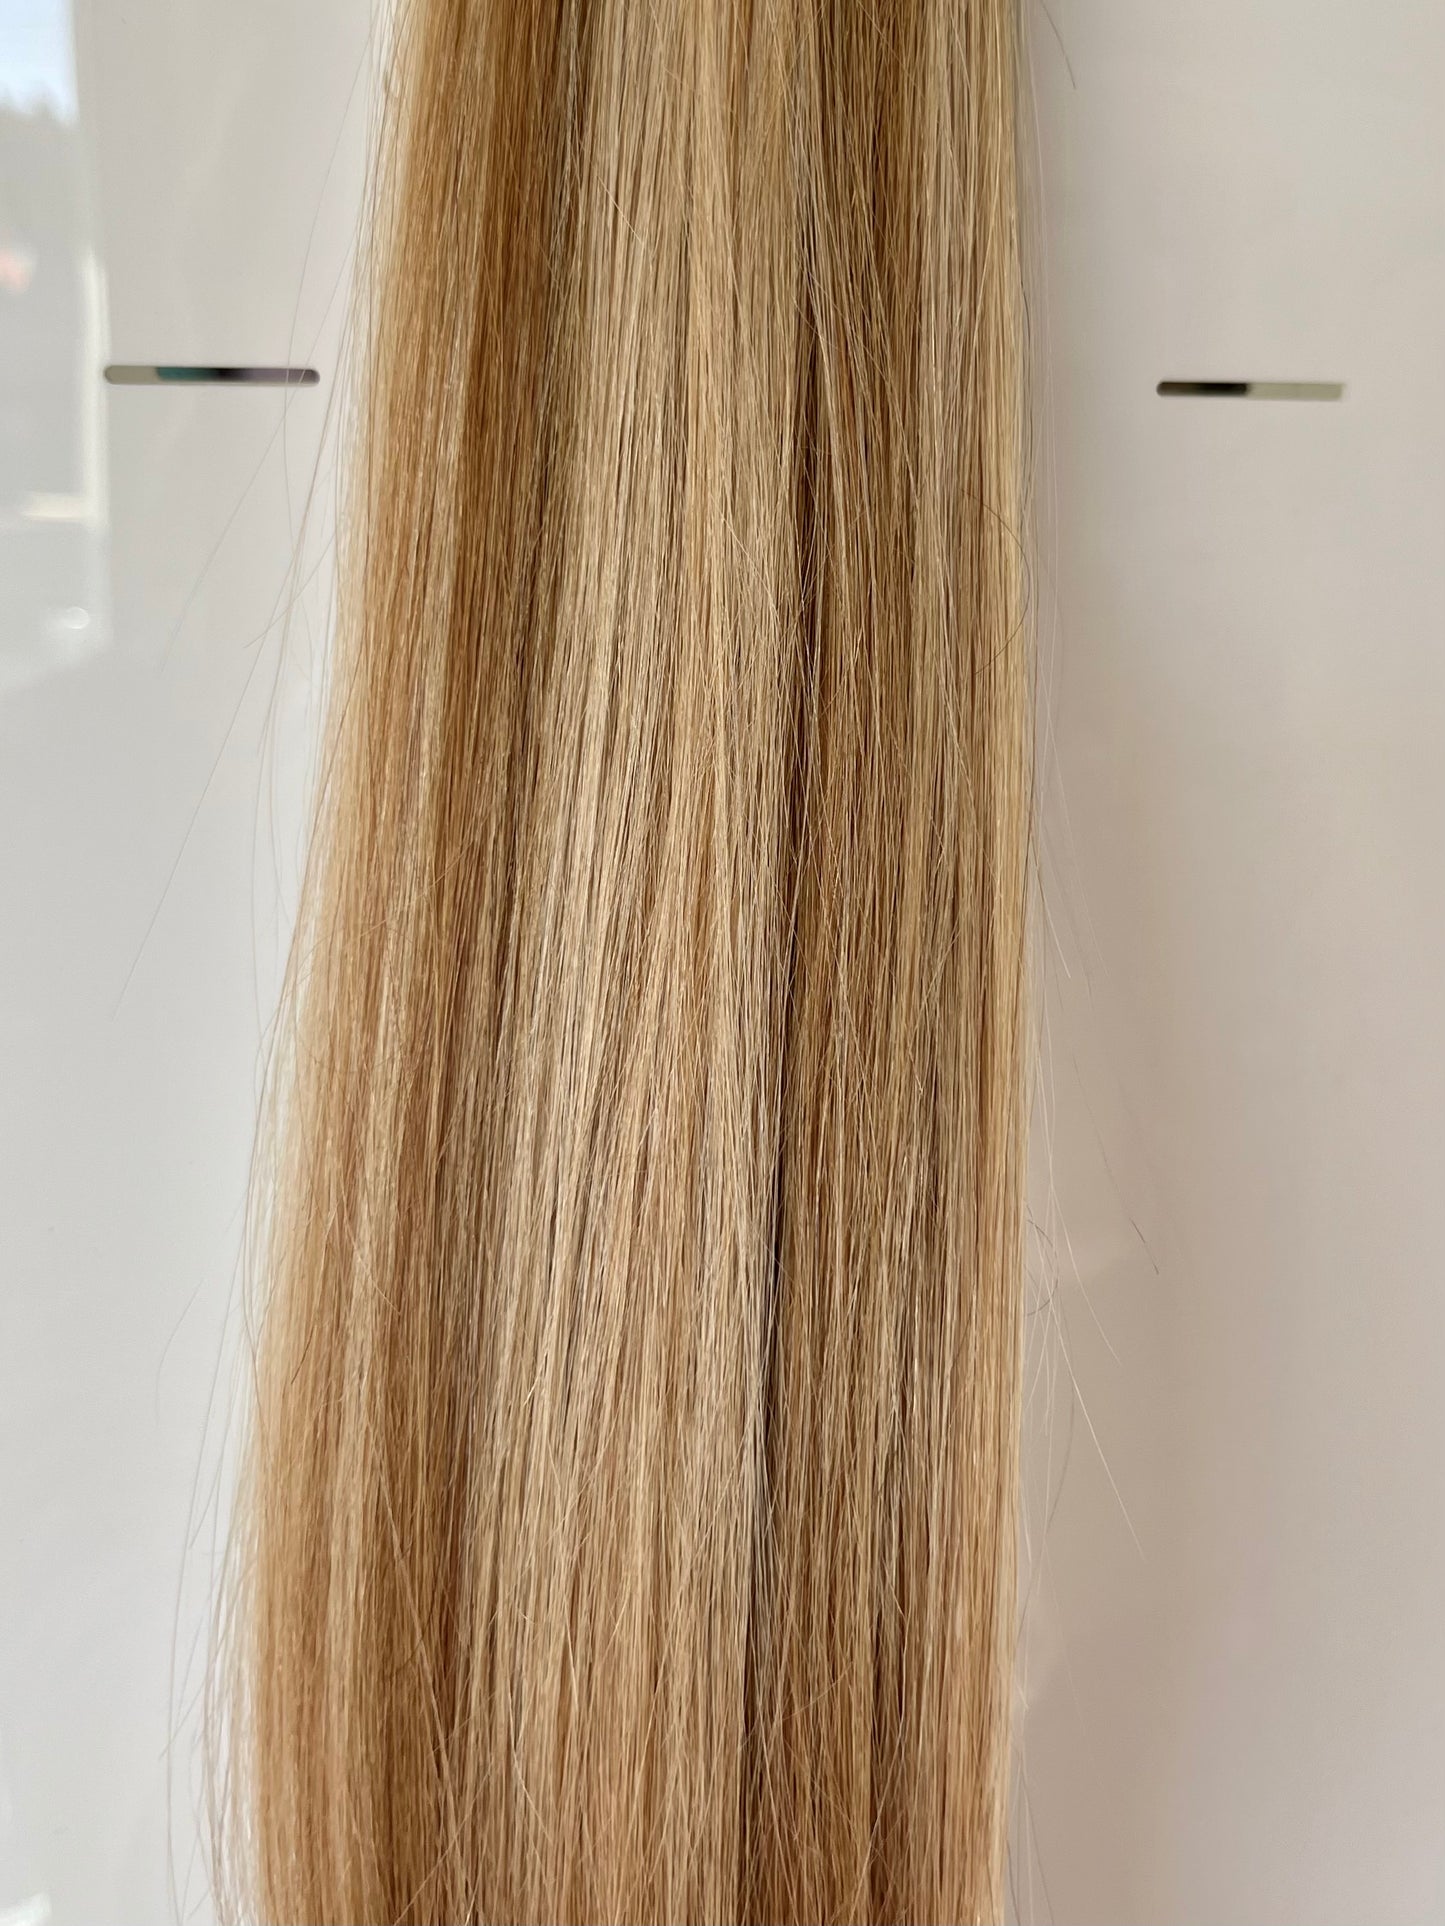 RETAIL CLIP IN EXTENSIONS - HIGHLIGHTED - PARISIAN BLONDE